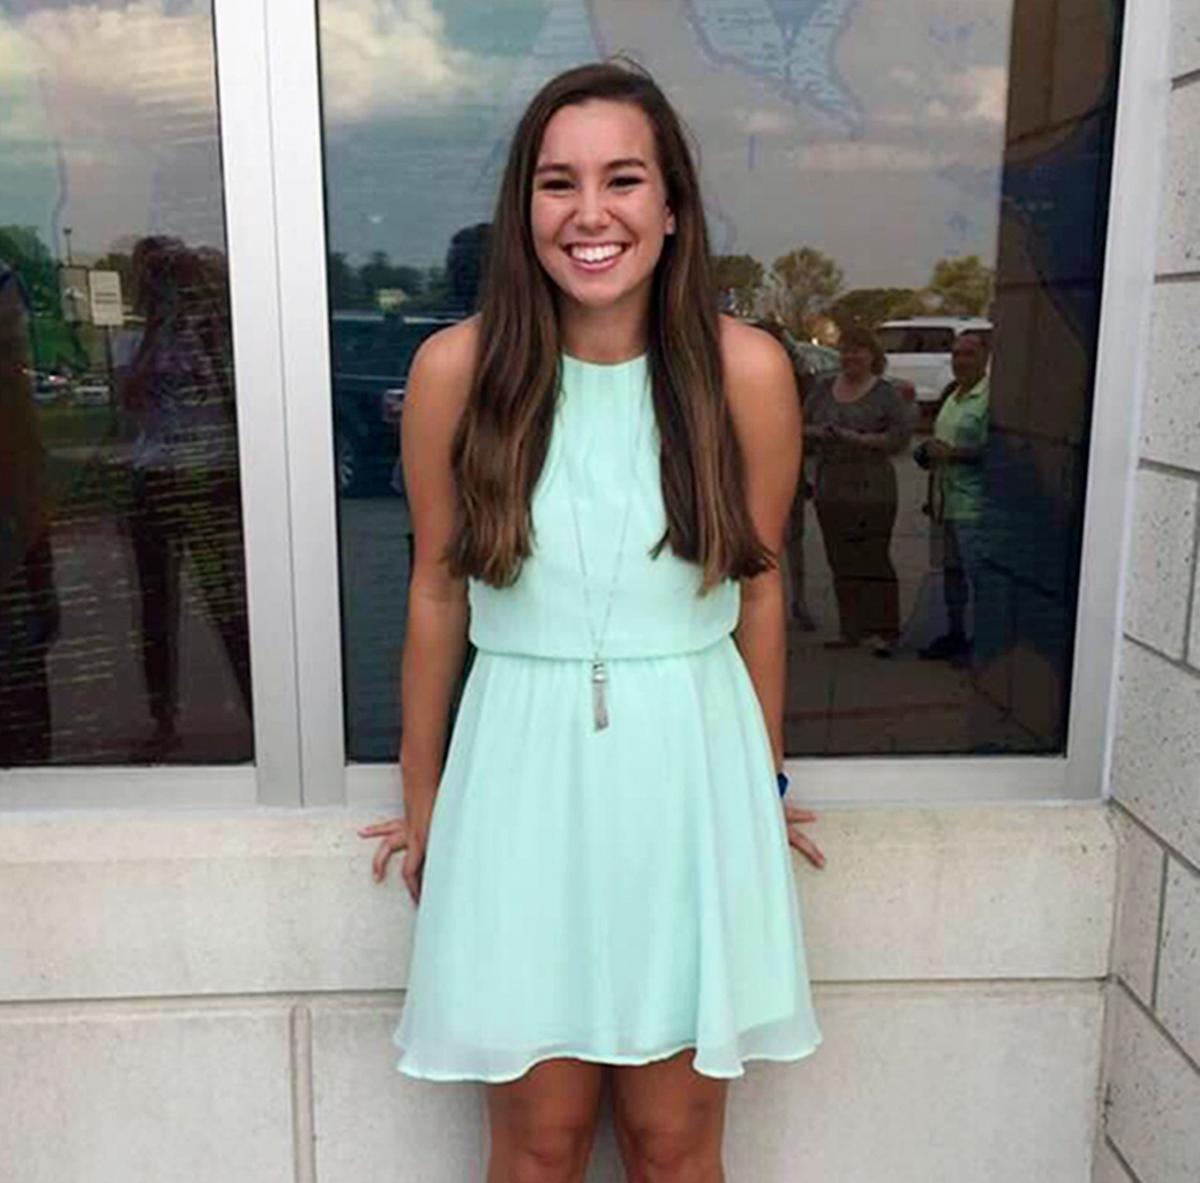 This undated photo released by the Iowa Department of Criminal Investigation shows Mollie Tibbetts, a University of Iowa student who was reported missing from her hometown in the eastern Iowa city of Brooklyn on Thursday, July 19, 2018. (Iowa Department of Criminal Investigation/AP)